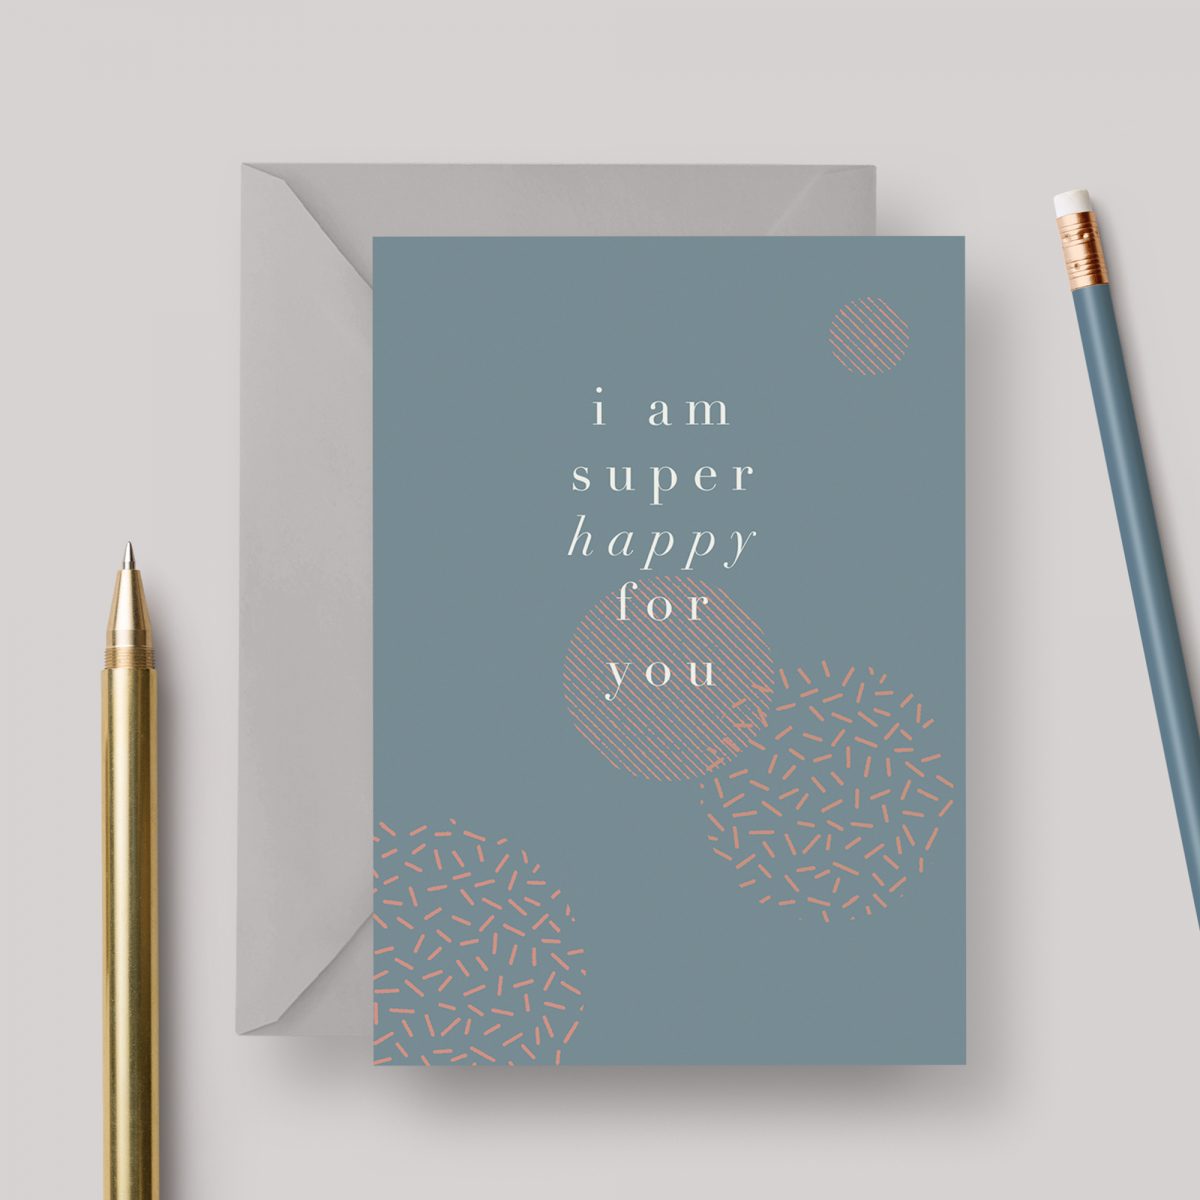 Super Happy A6 greeting card with grey envelope